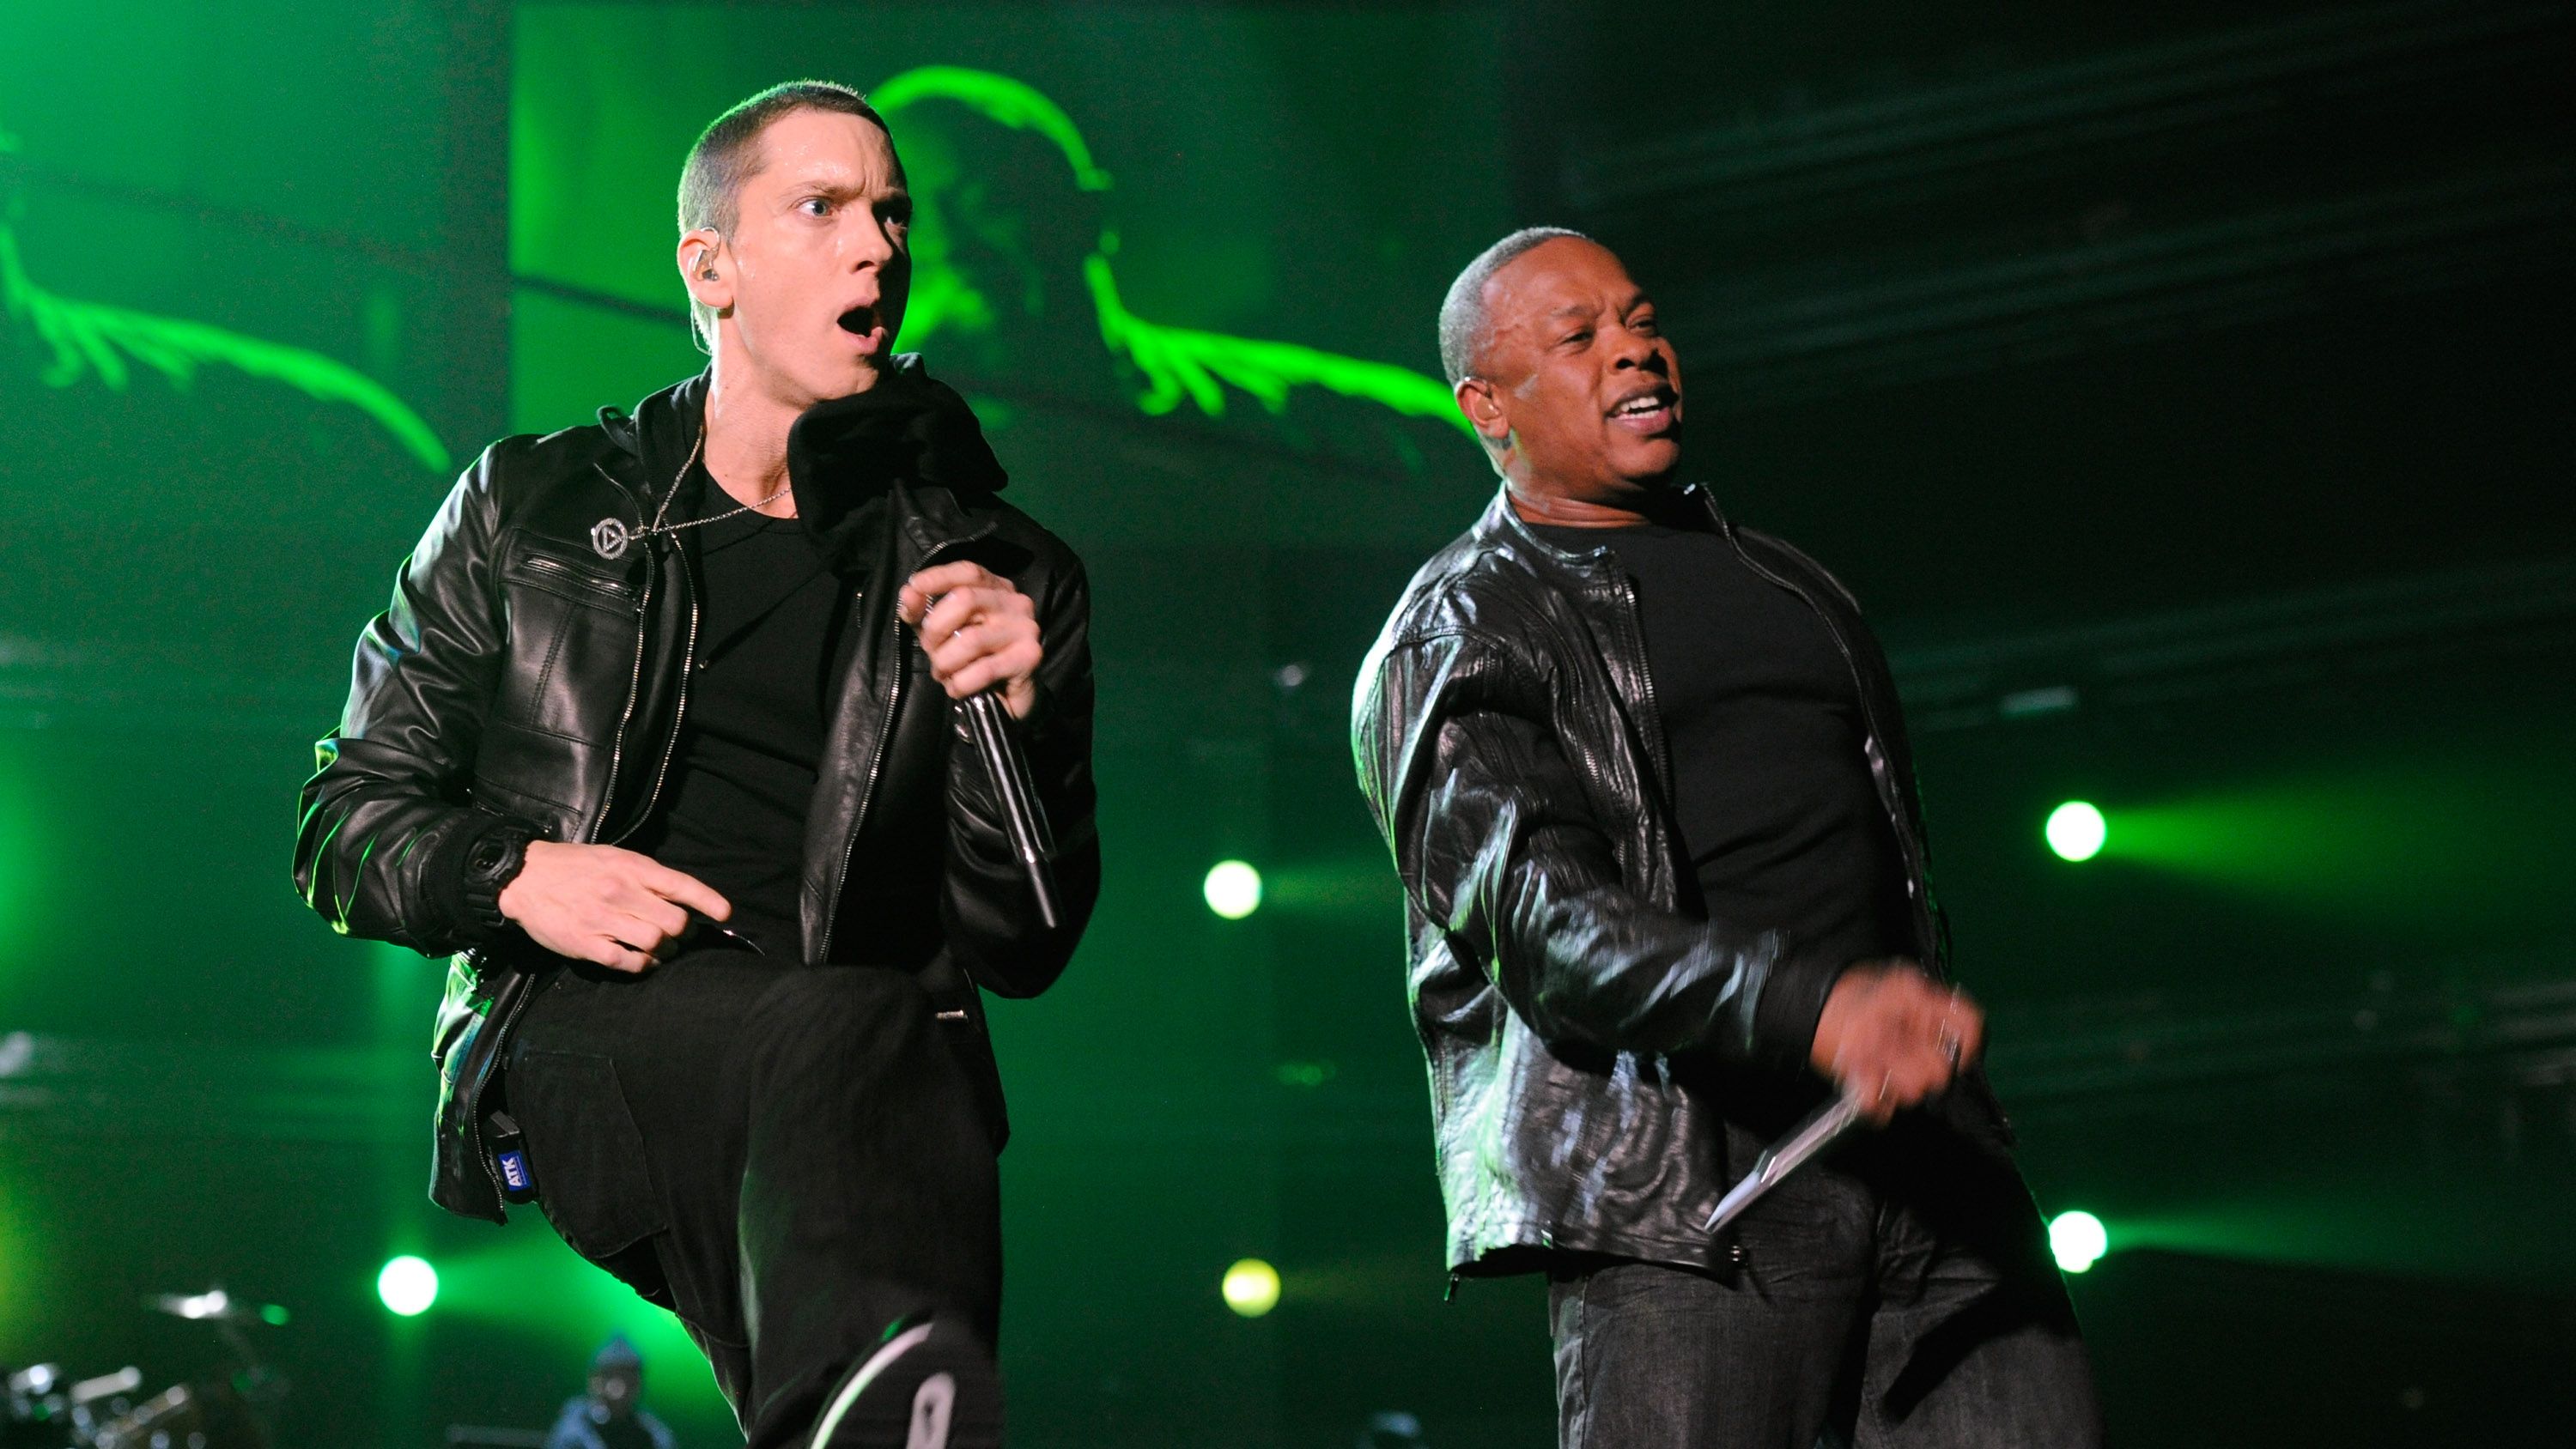 Did hip-hop seize its opportunity at the Super Bowl halftime?